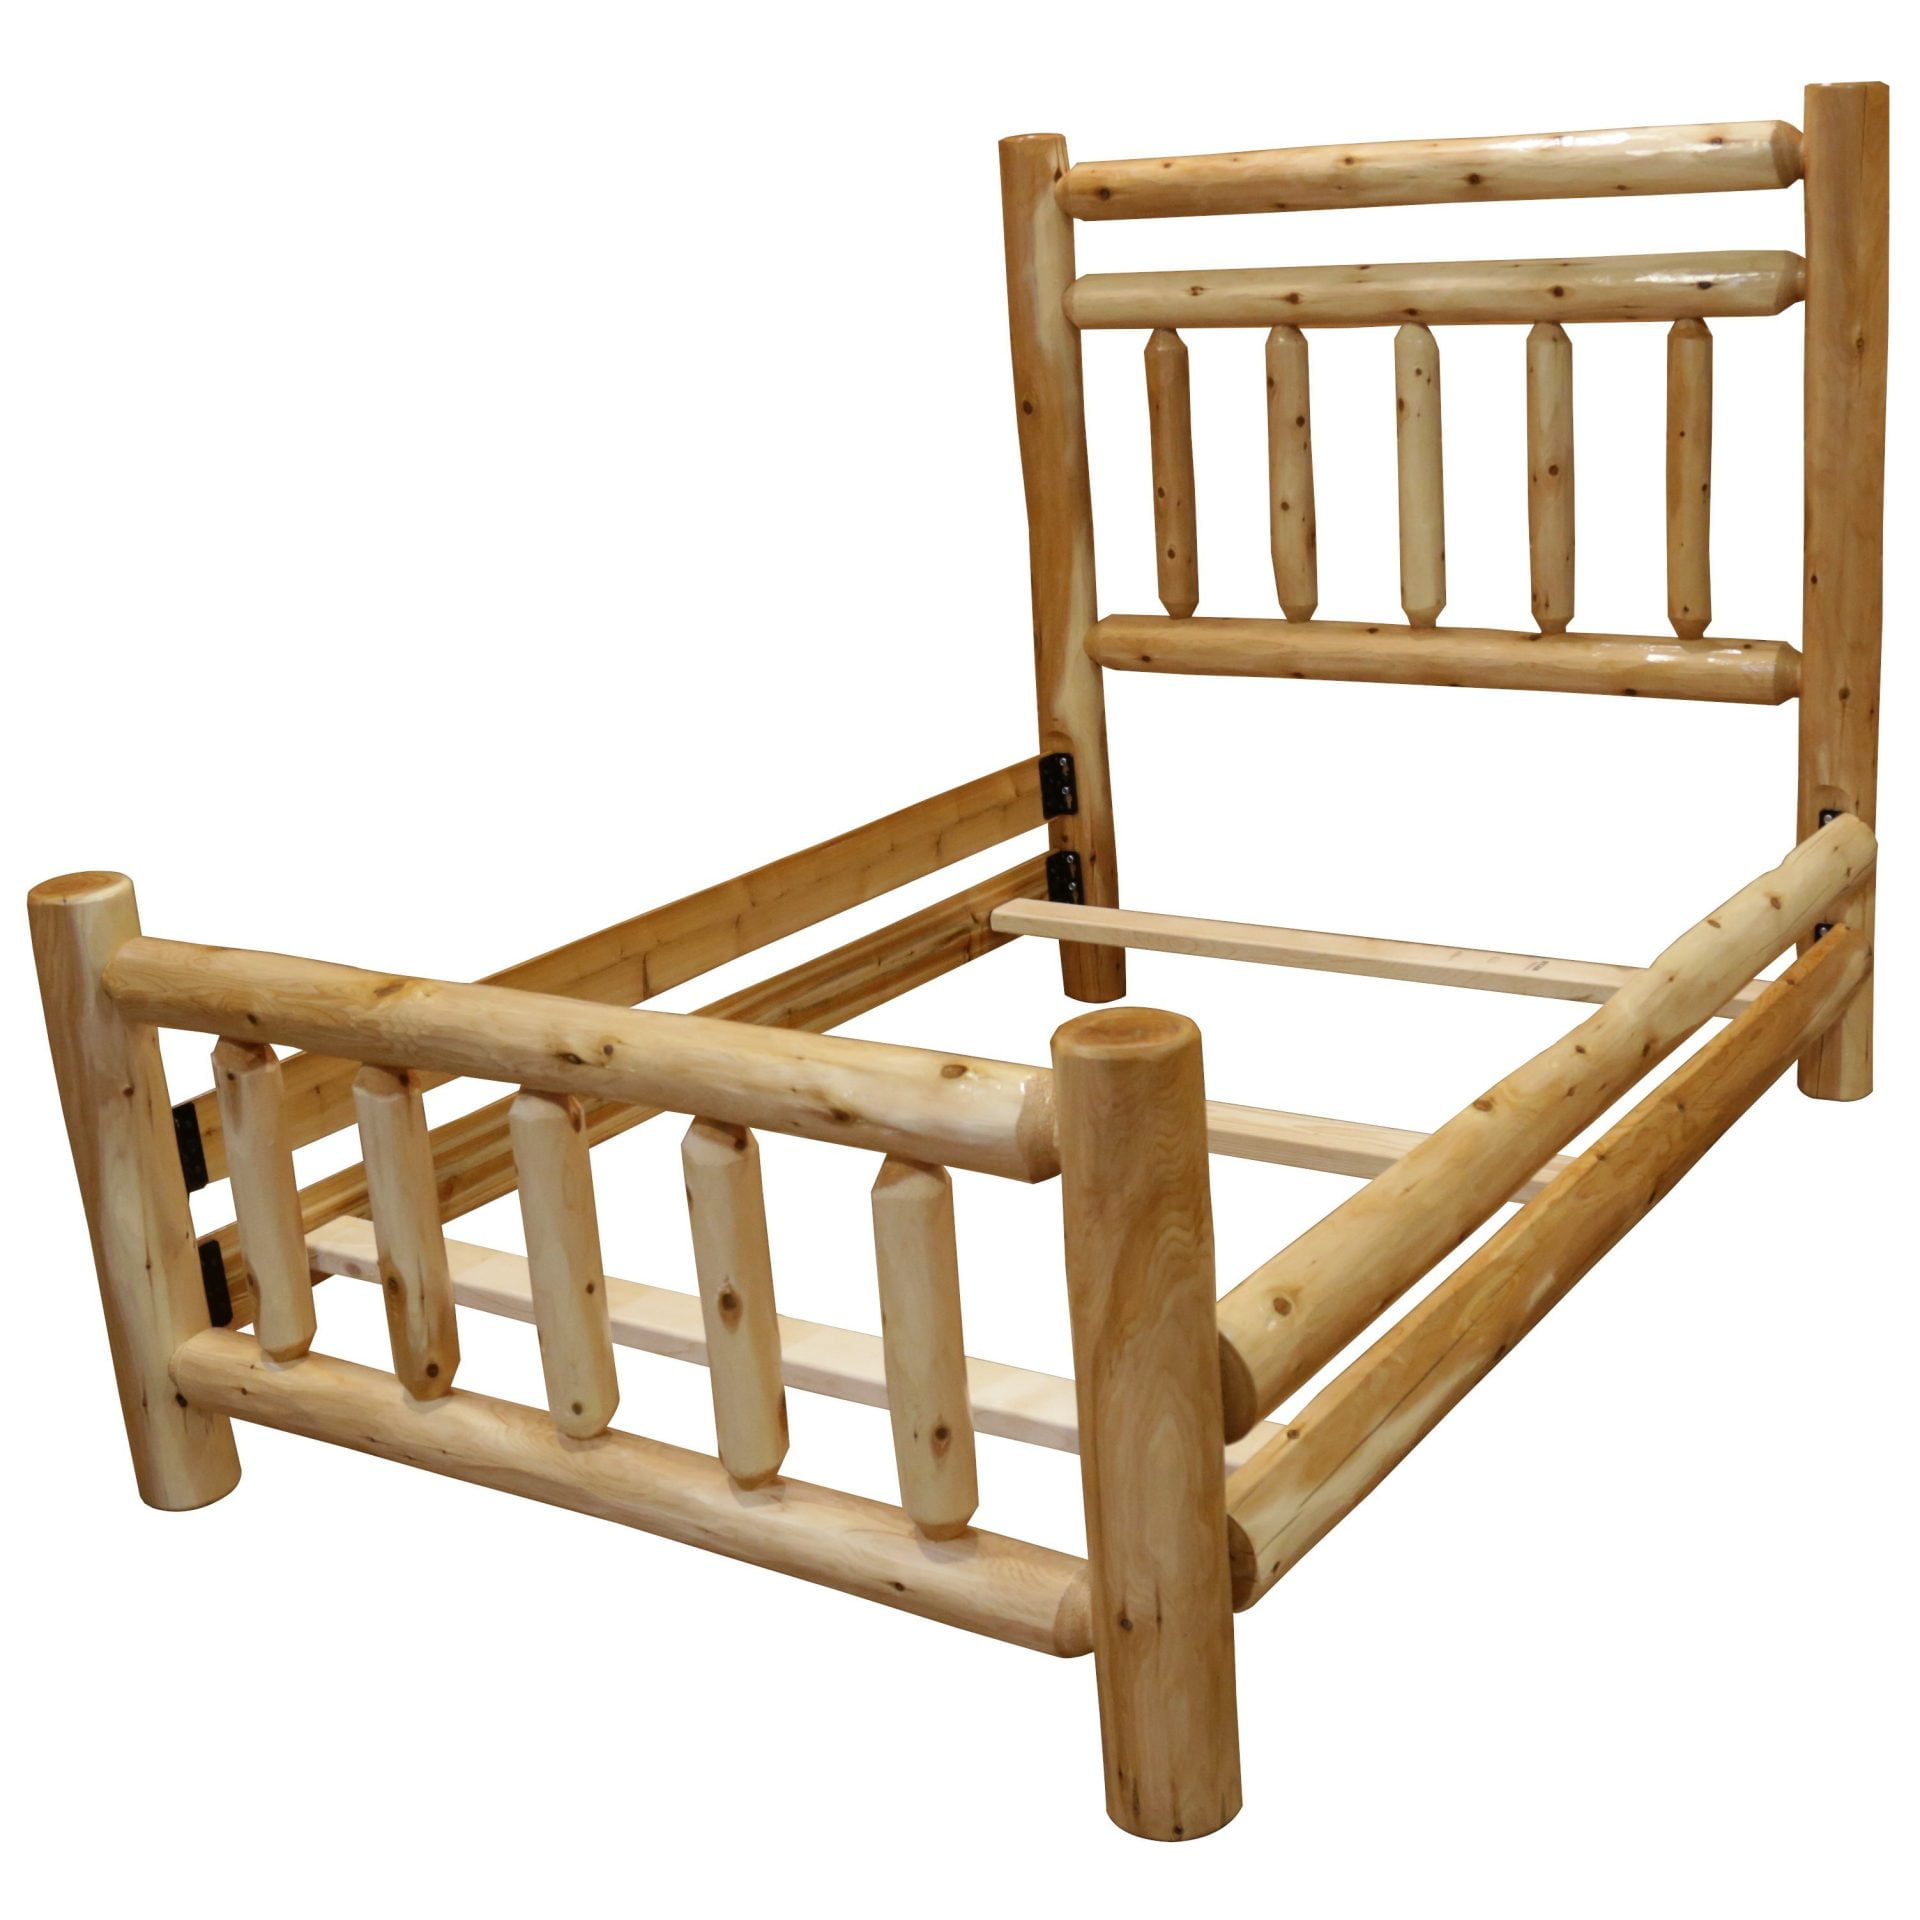 Rustic White Cedar Log Mission Style Double Top Rail Bed